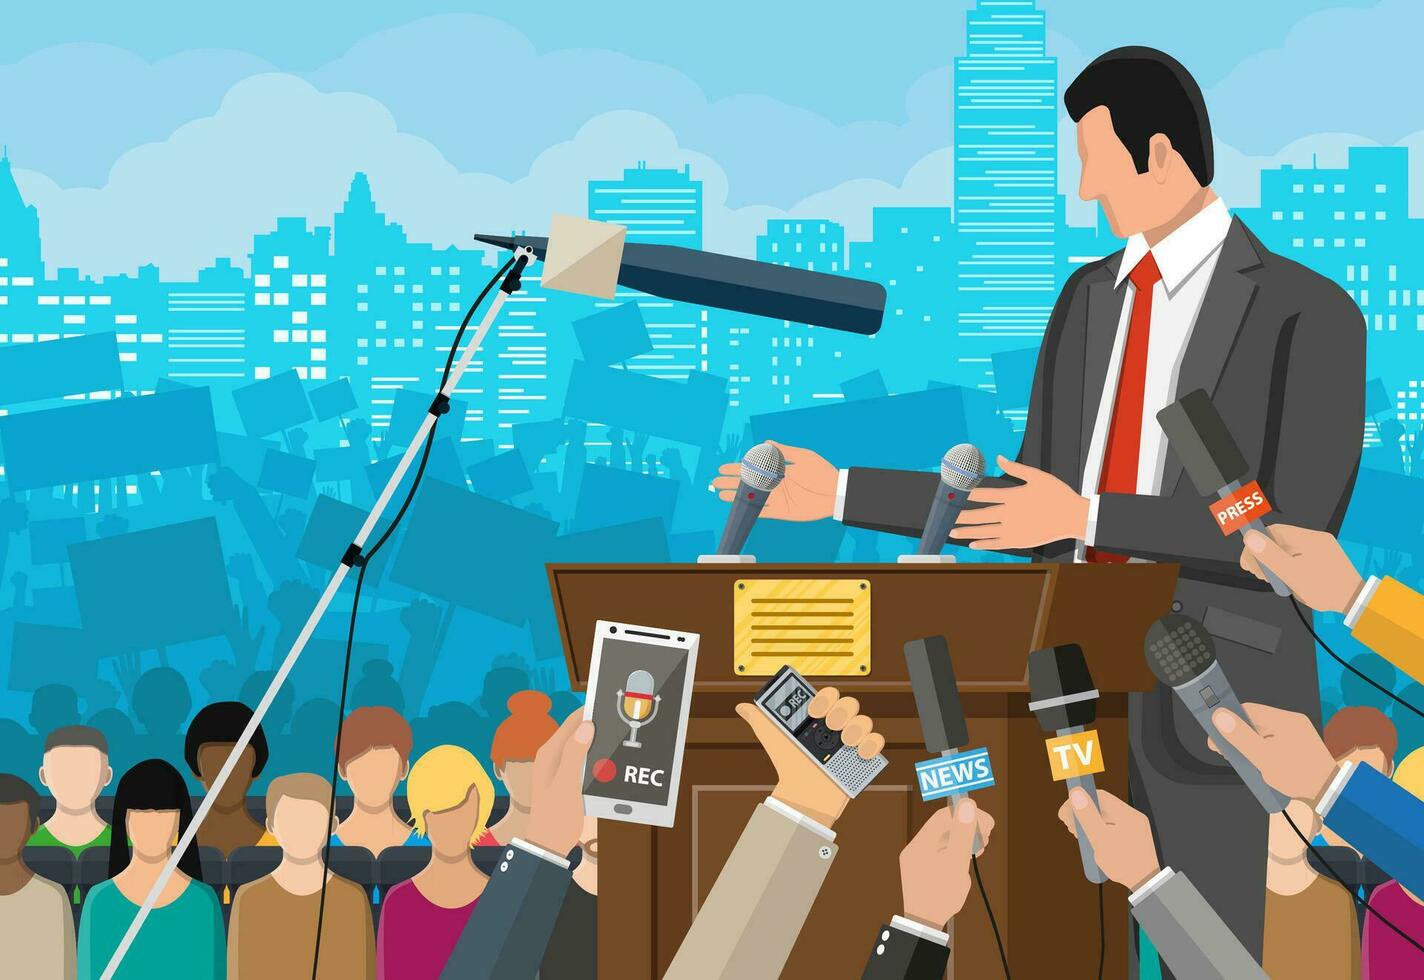 Public speaker. Rostrum, tribune and hands of journalists with microphones and digital voice recorders. Press conference concept, news, media, journalism. Vector illustration in flat style